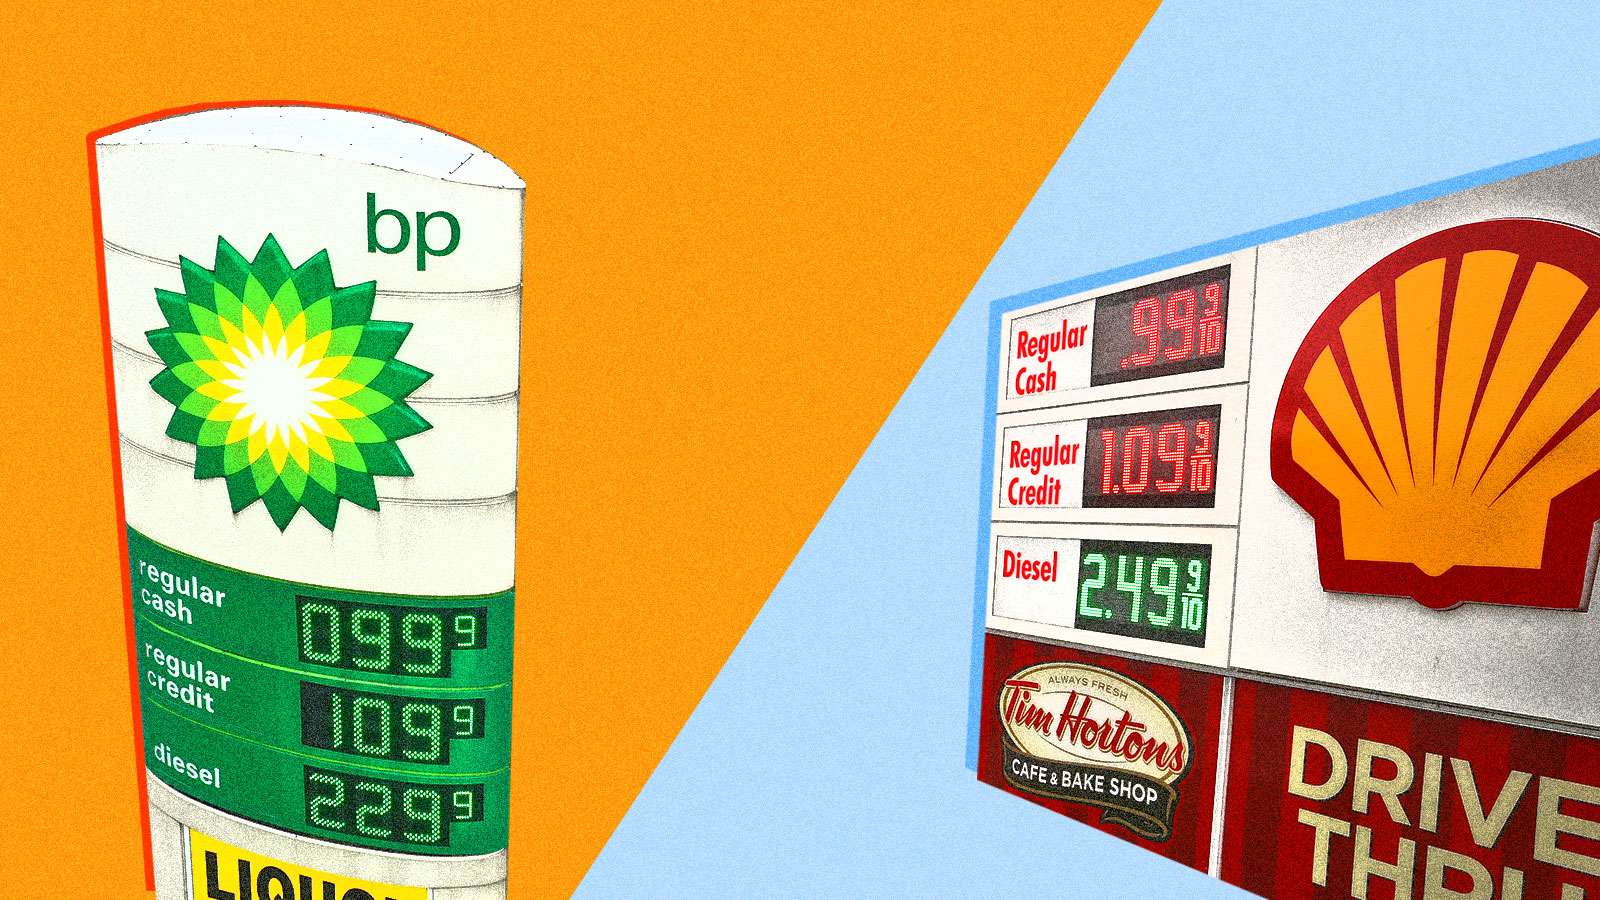 A split screen of a BP gas sign and a Shell gas sign, both with gas prices under one dollar per gallon